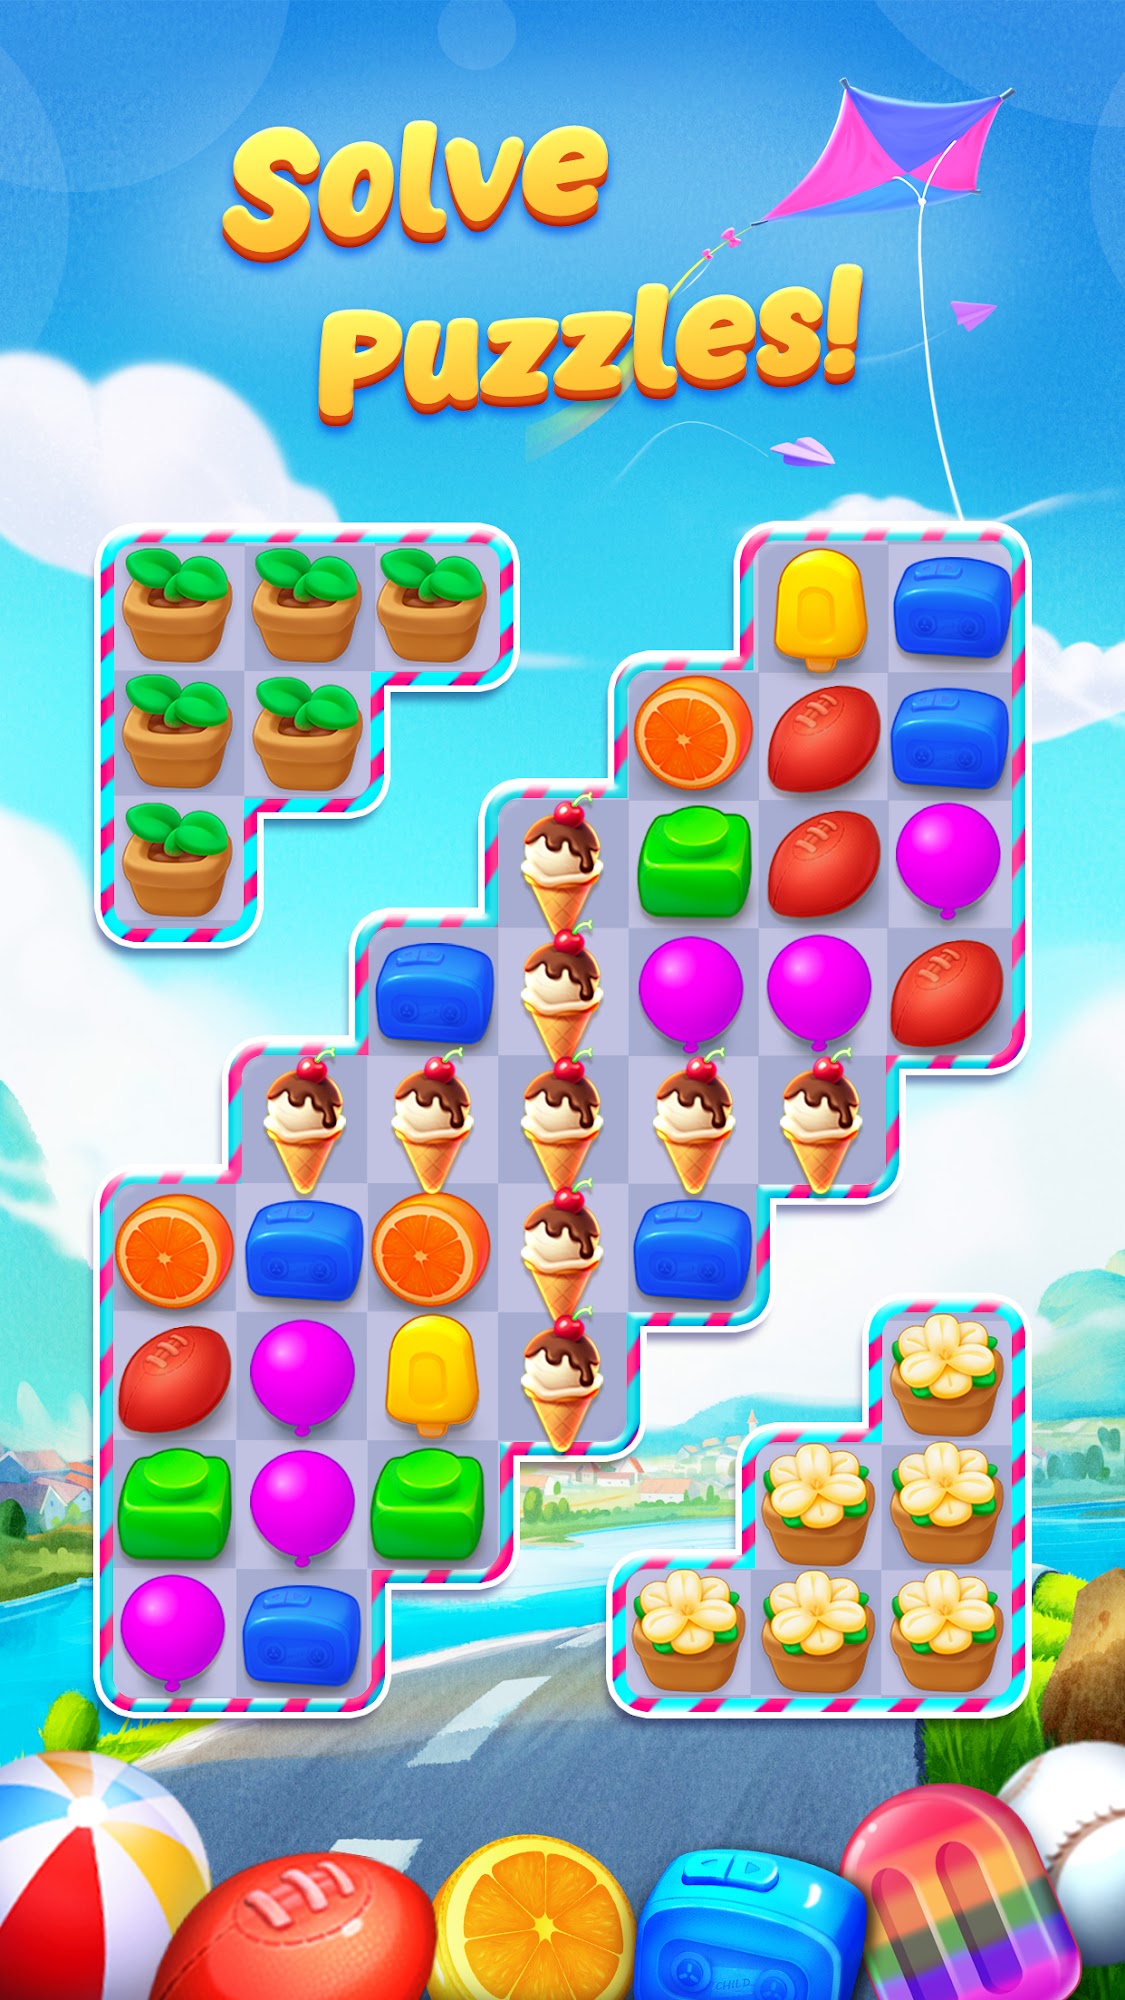 Gameplay of the Best Friends: Puzzle & Match for Android phone or tablet.